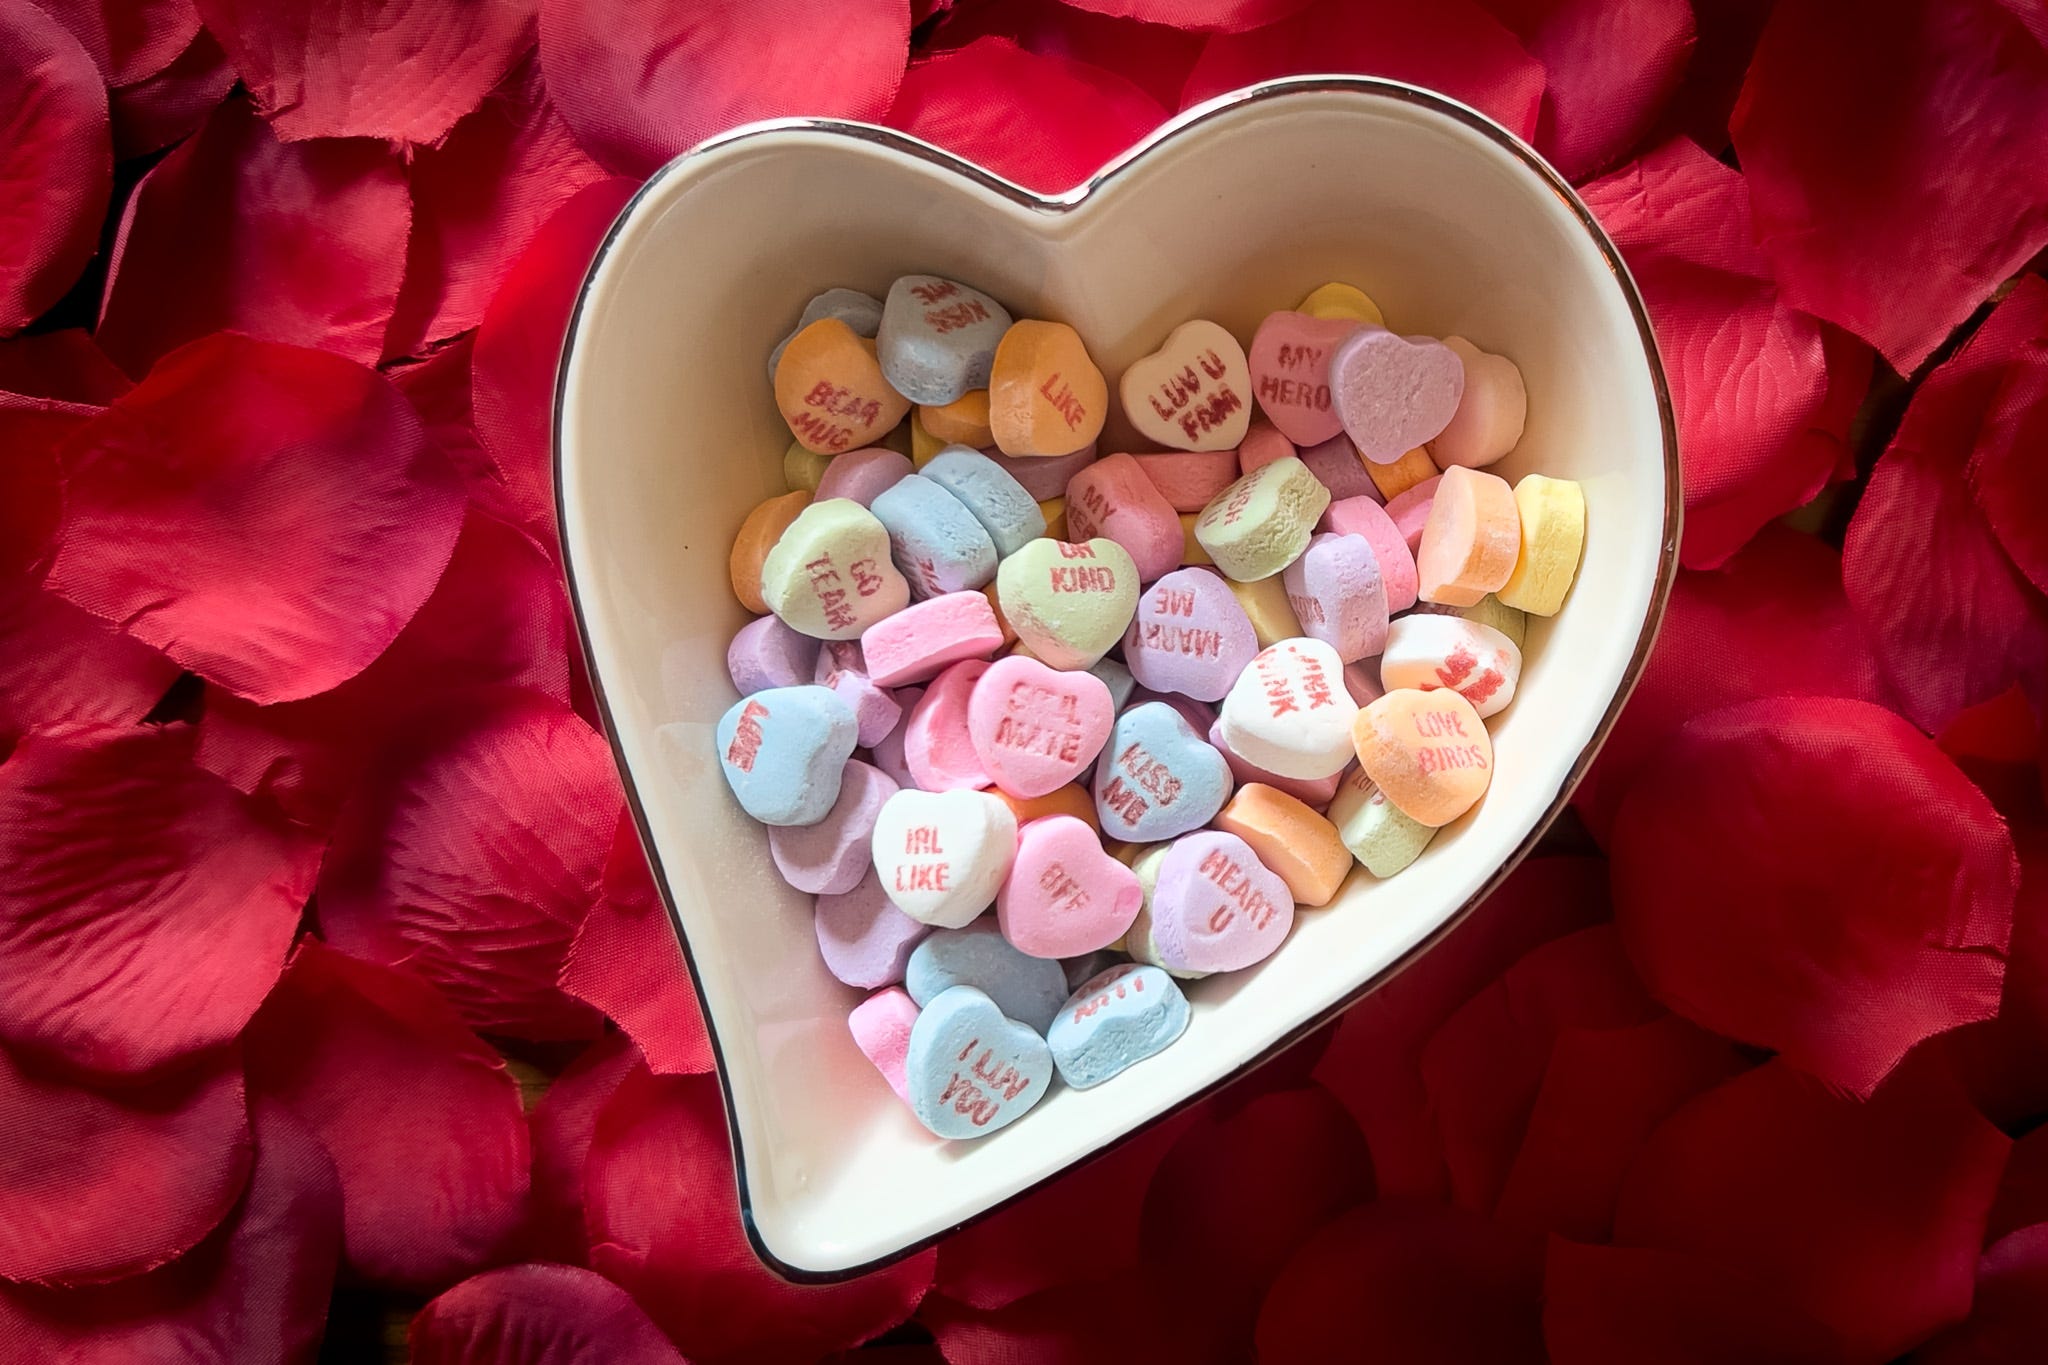 A heart shaped bowl sitting in a bed of  red rose petals with small candy hearts inscribed messages, like “be kind” and “love u”